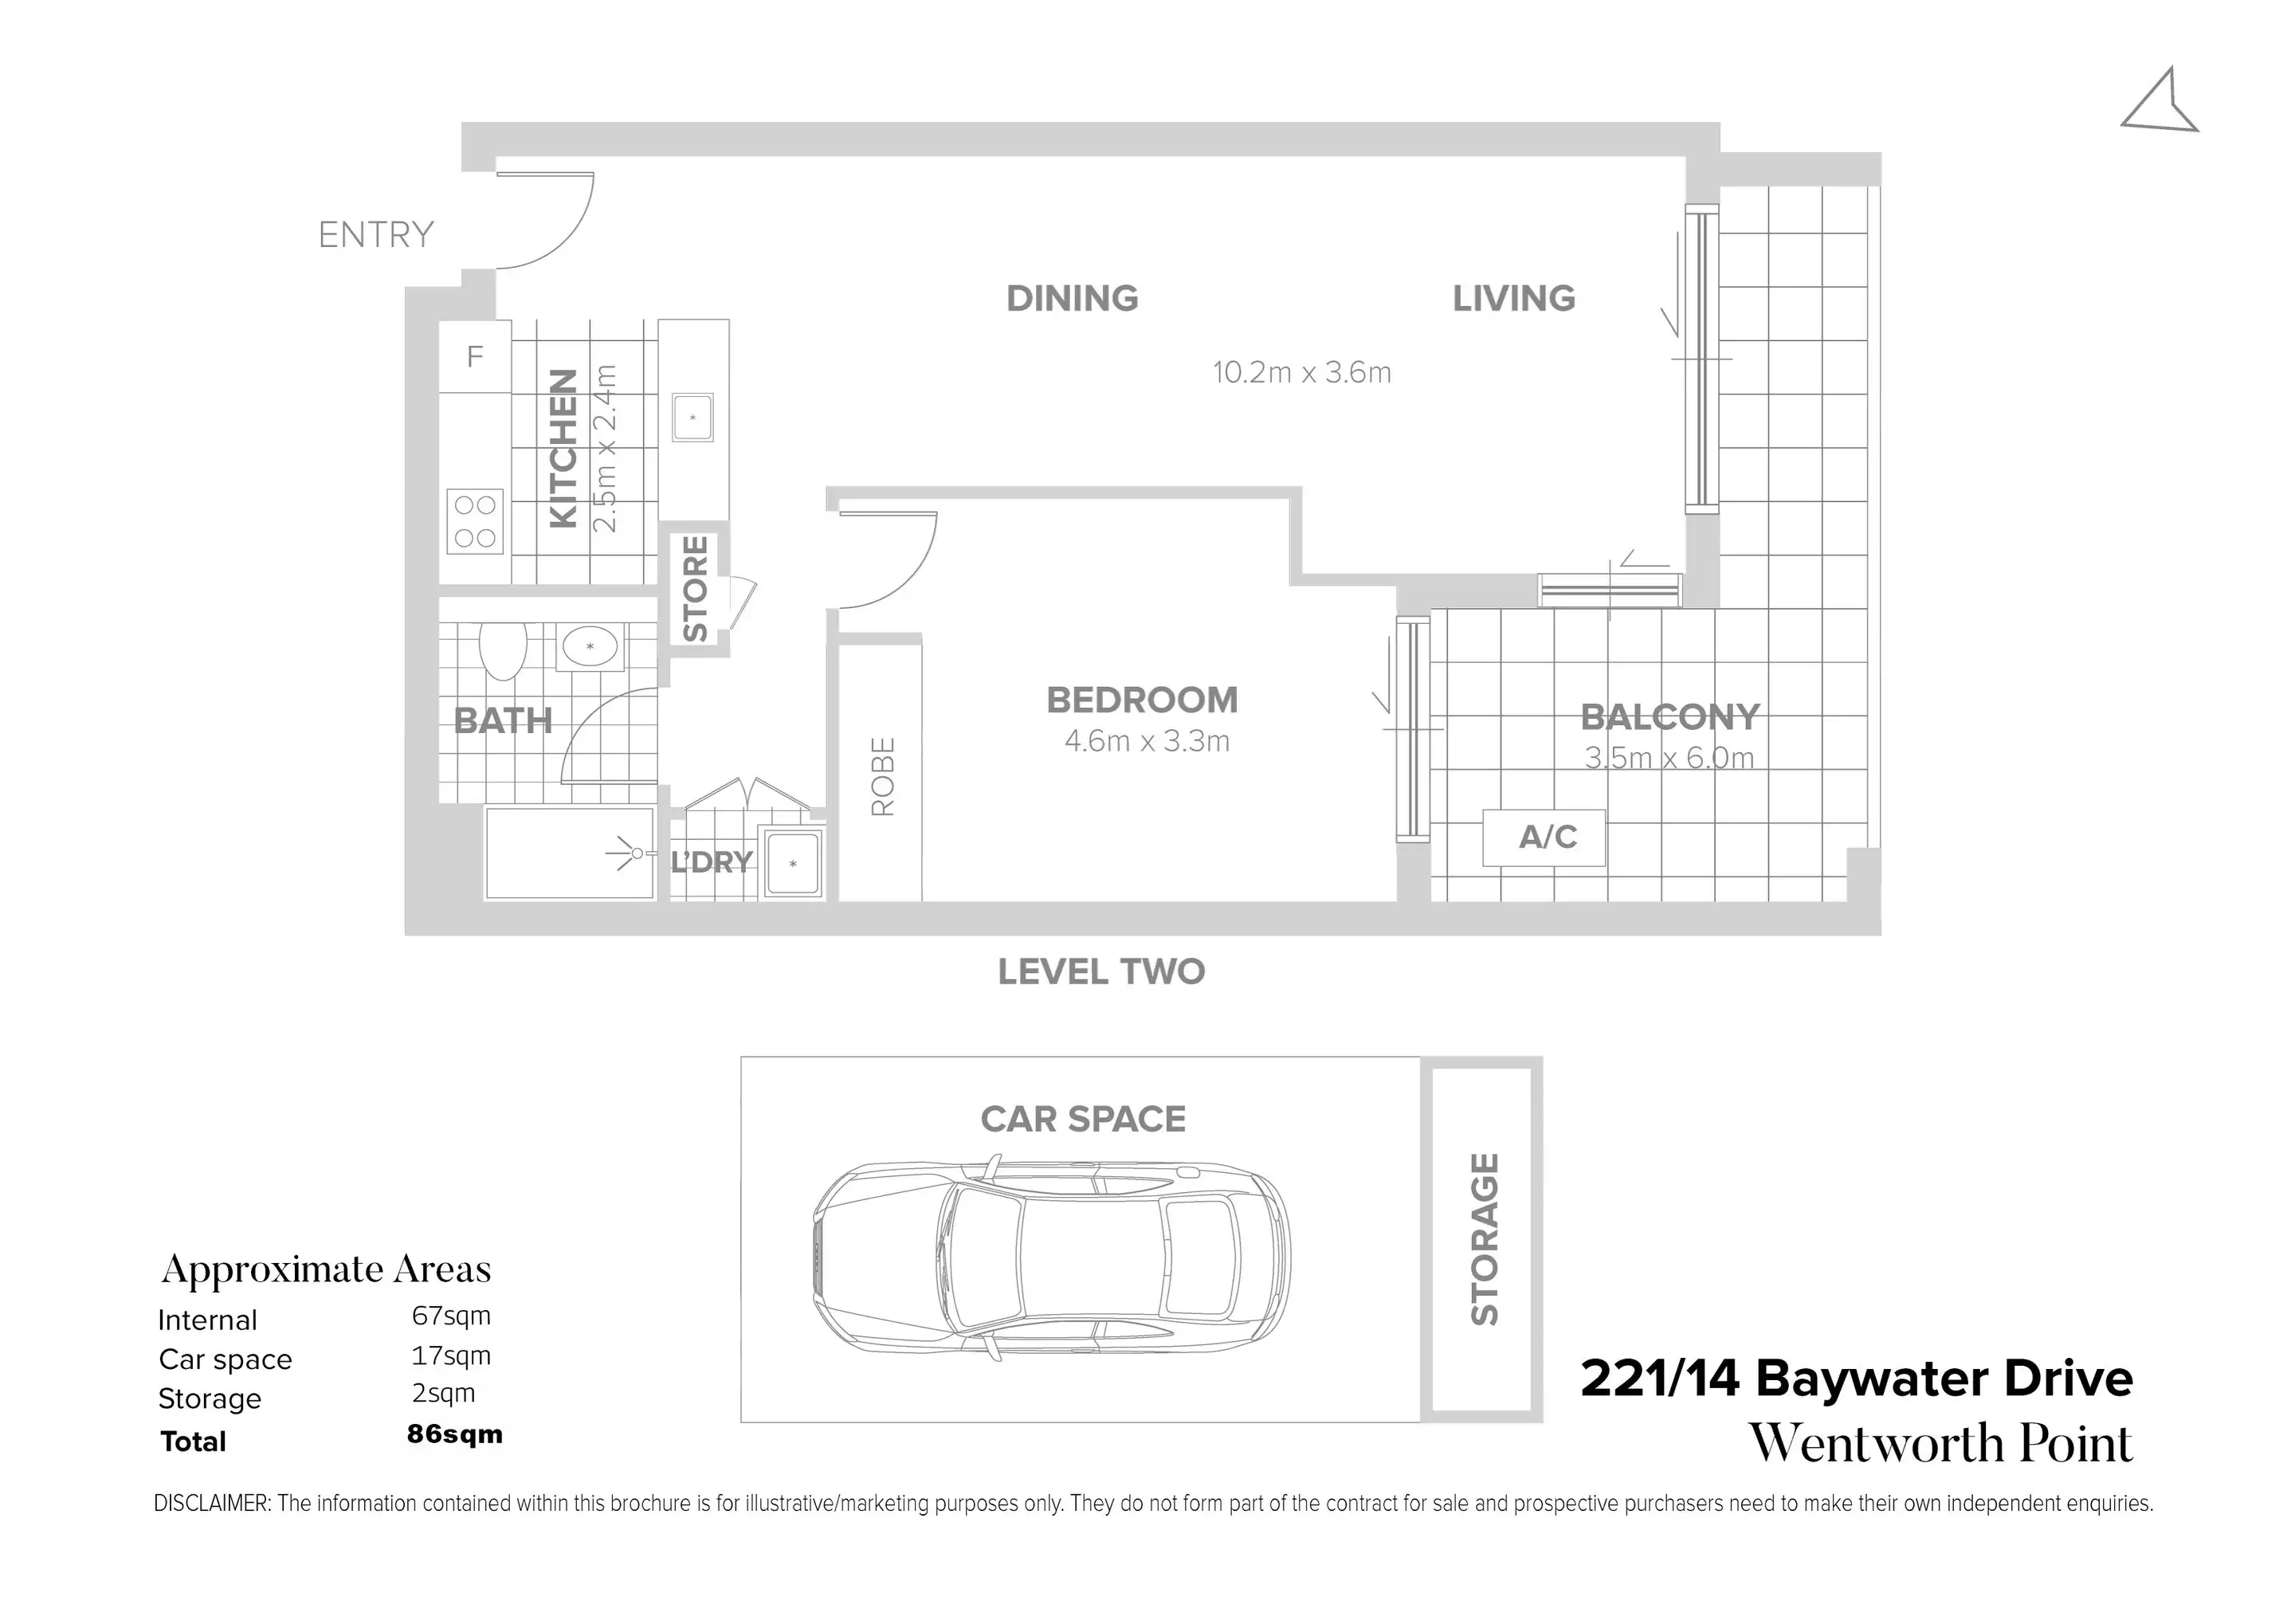 221/14 Baywater Drive, Wentworth Point Sold by Chidiac Realty - floorplan